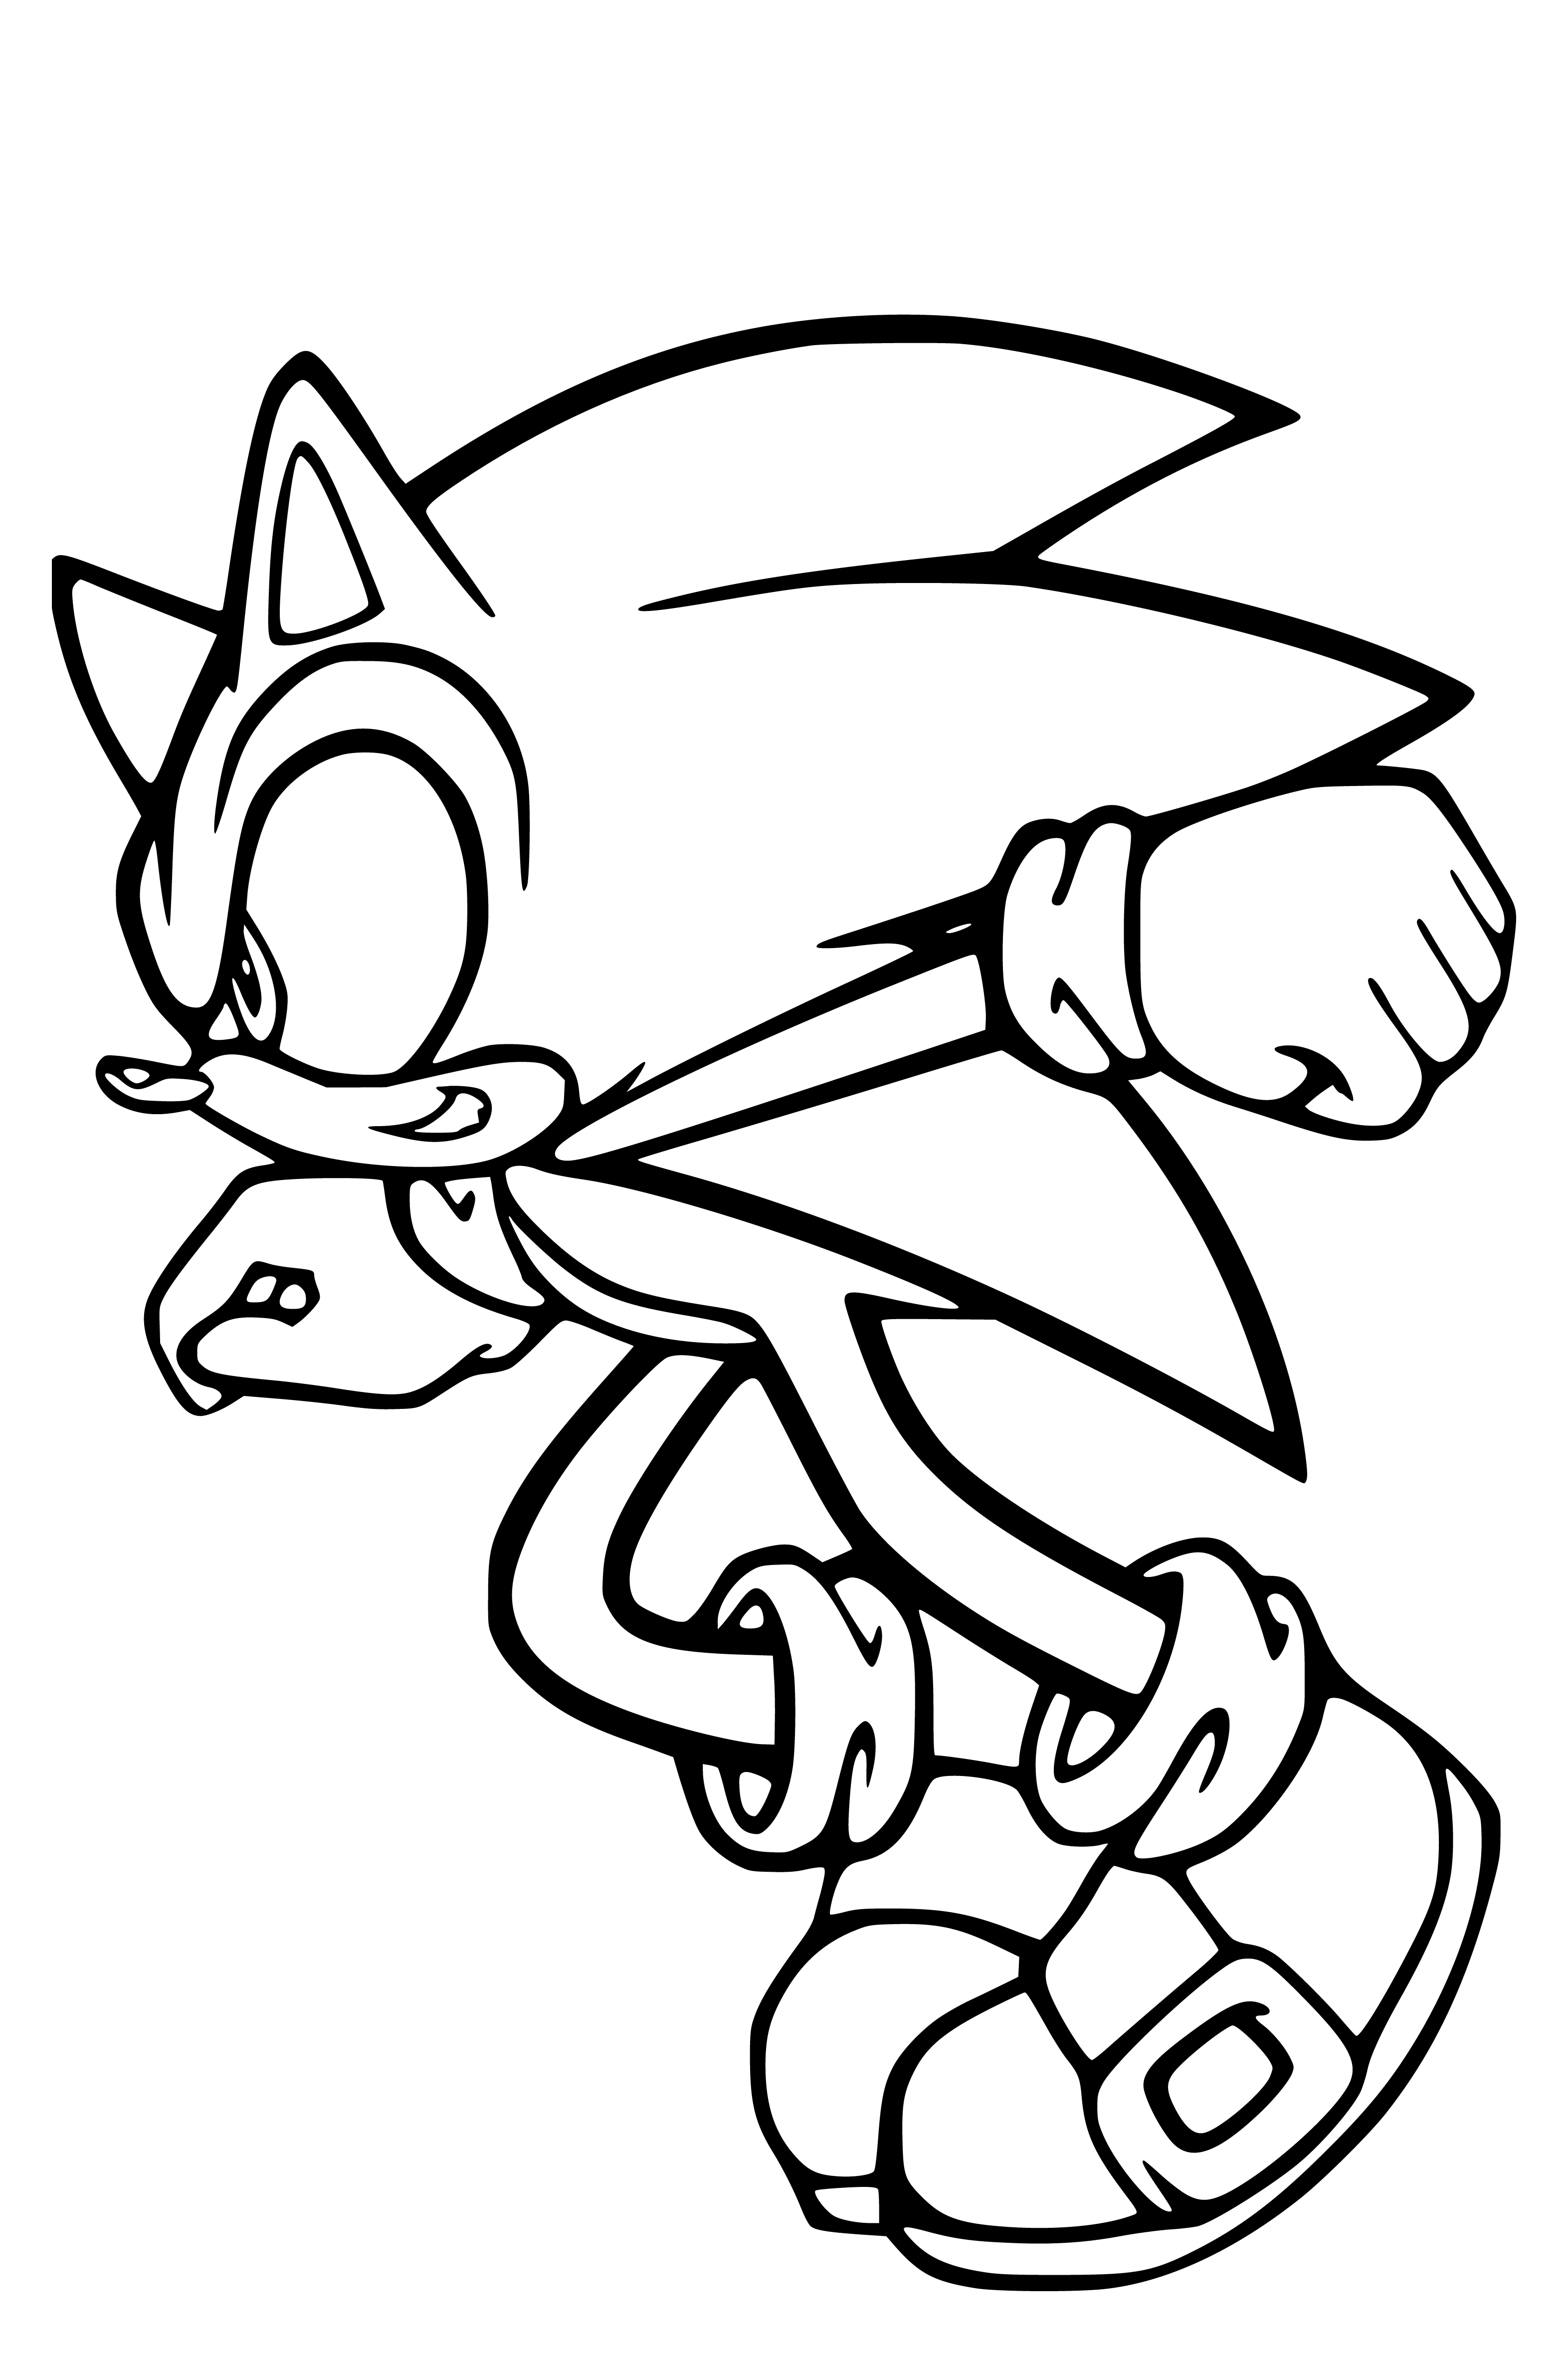 Printable Running Sonic Coloring Page for kids.